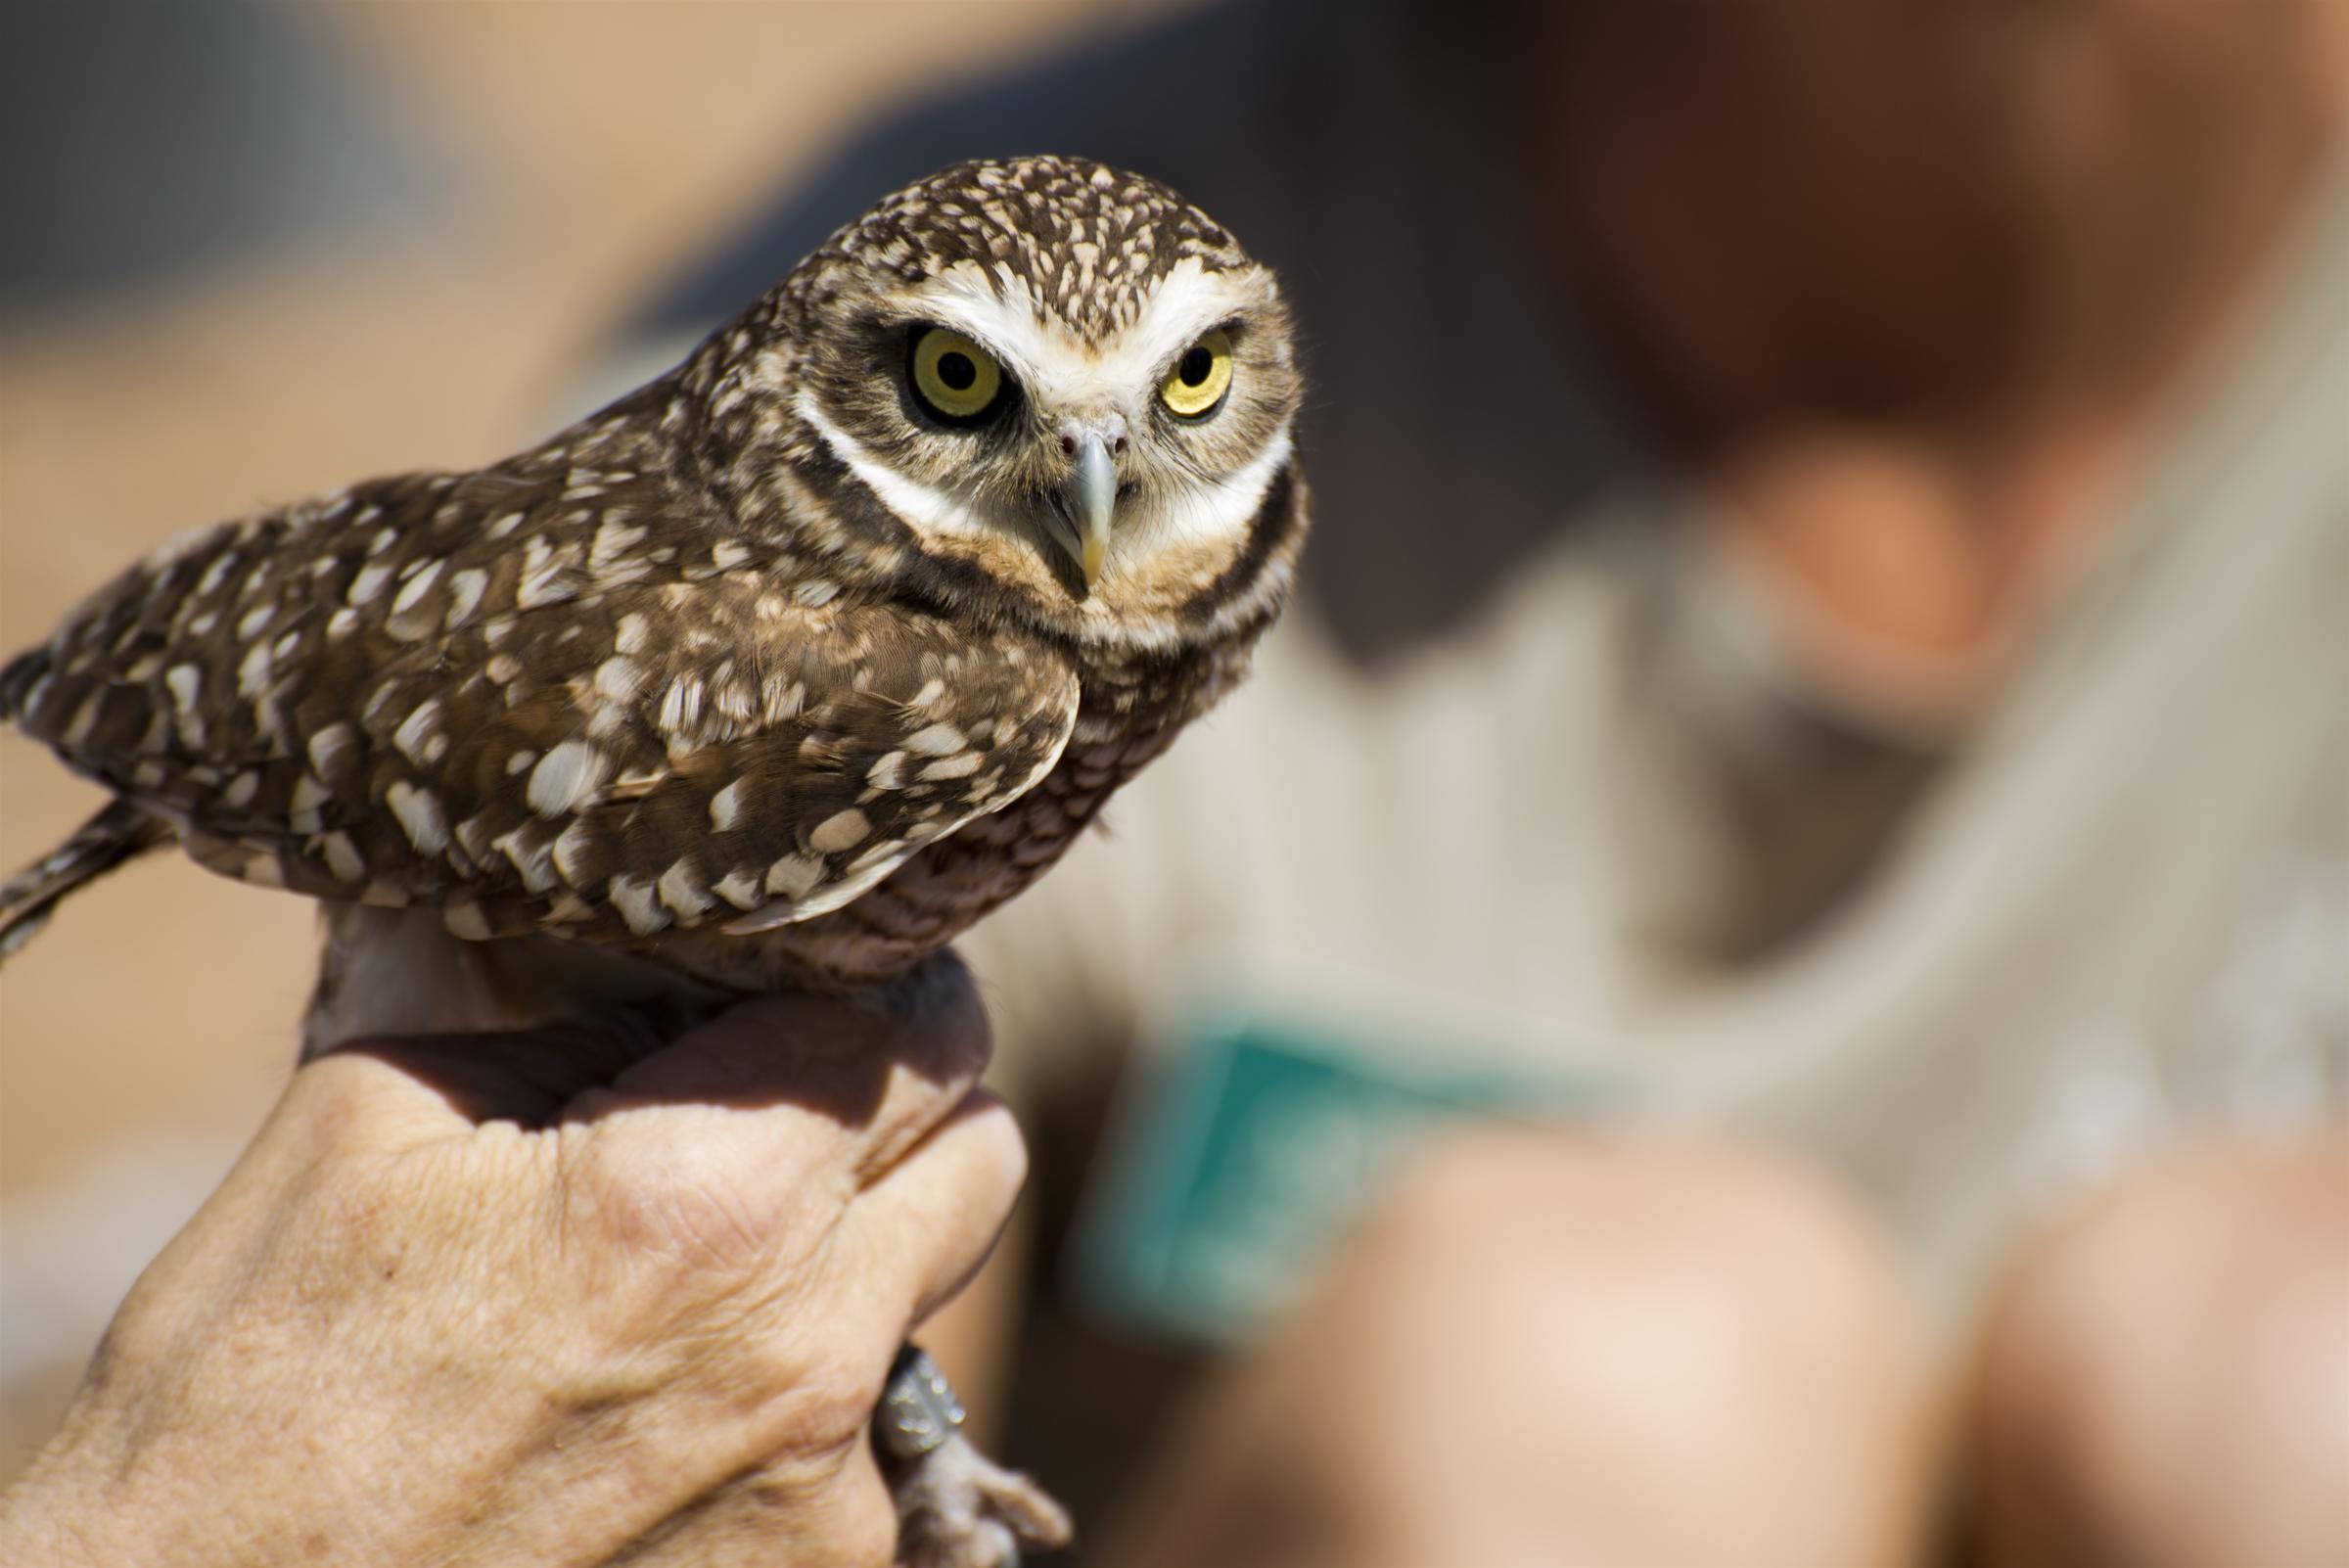 A Burrowing Owl rests in the hand of a conservationist.